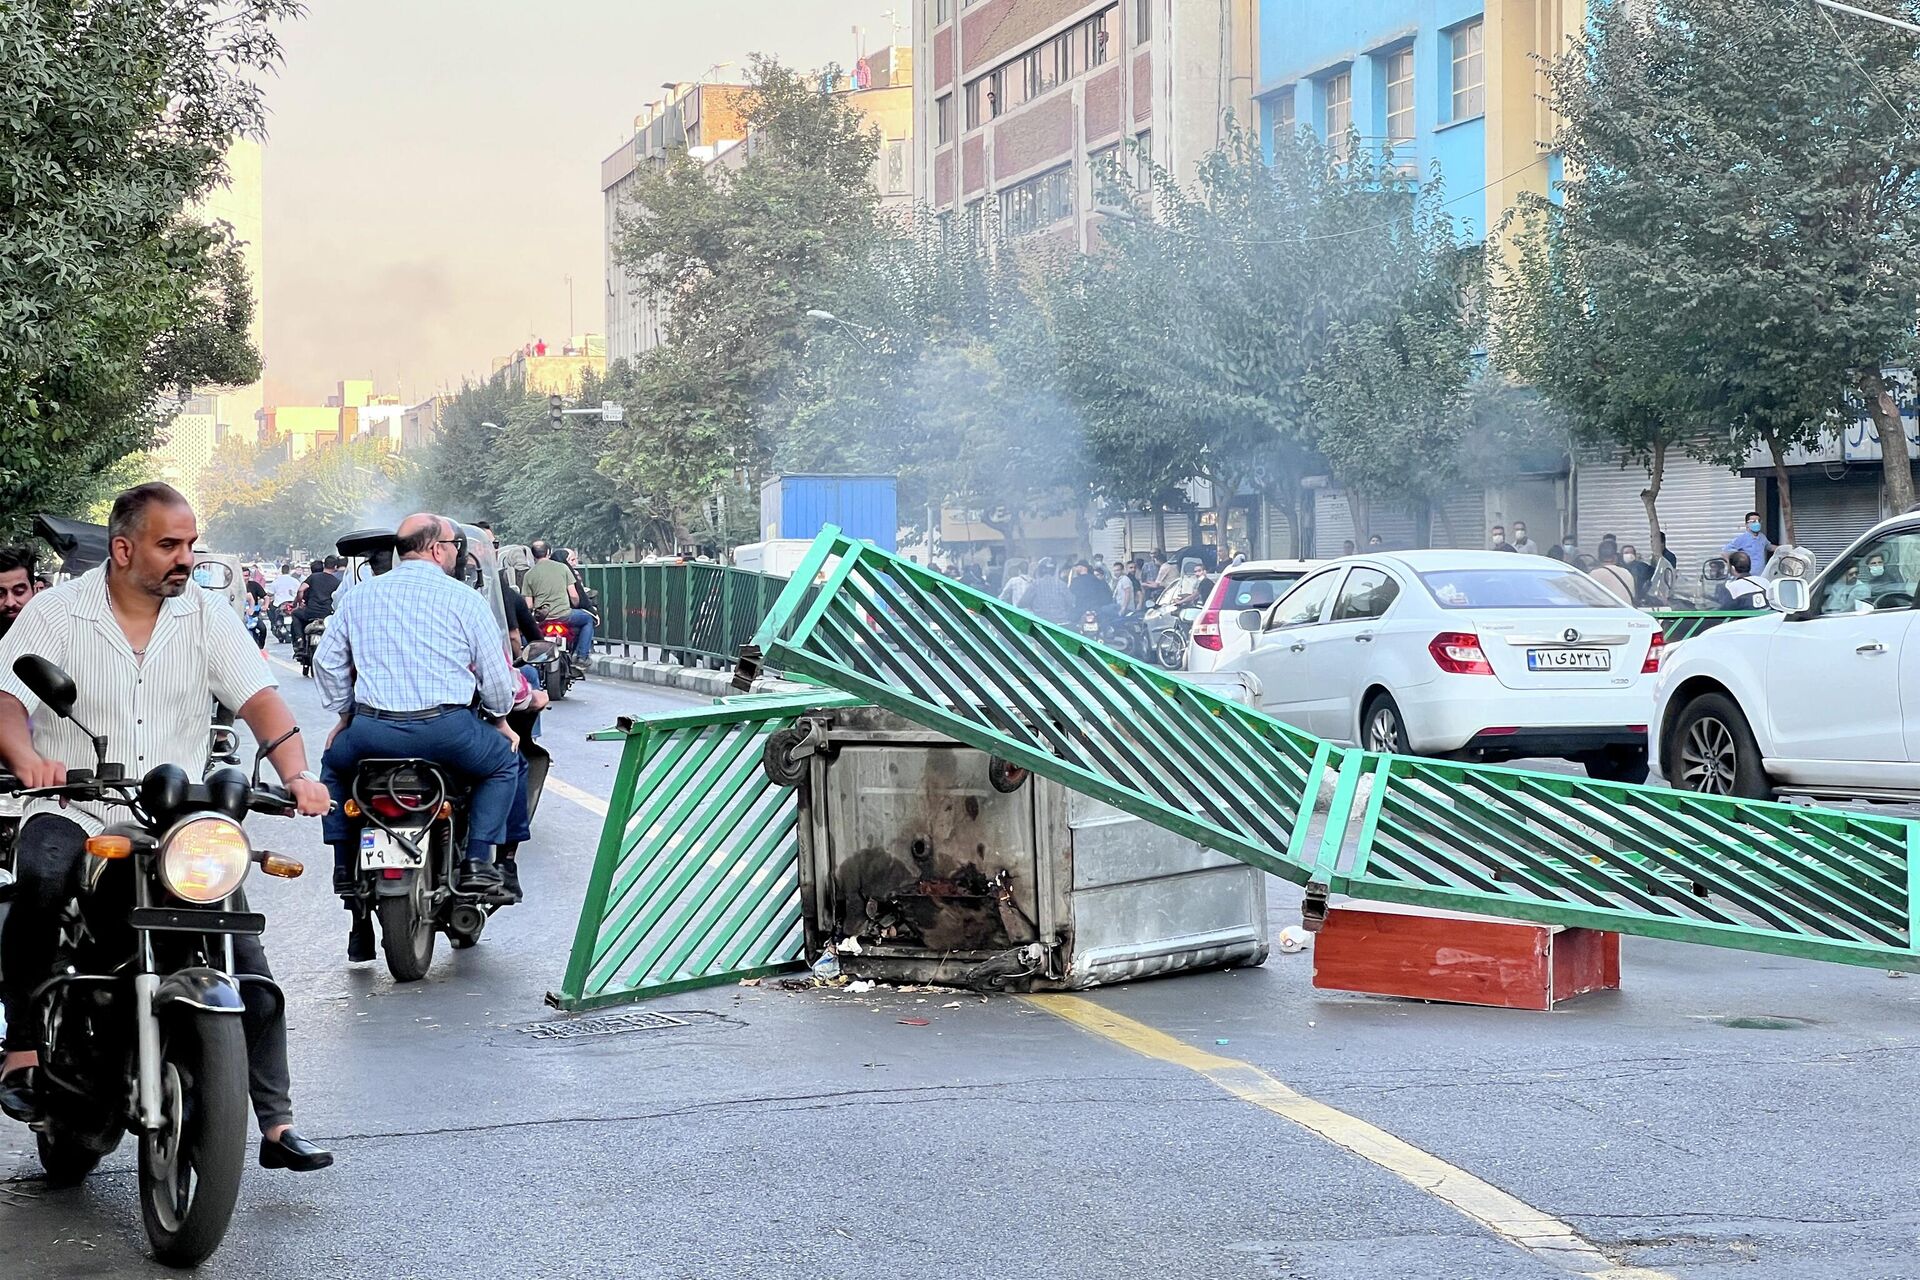 A picture obtained by AFP outside Iran, shows a garbage container blocking a road in the capital Tehran on October 8, 2022. - Sputnik International, 1920, 28.10.2022